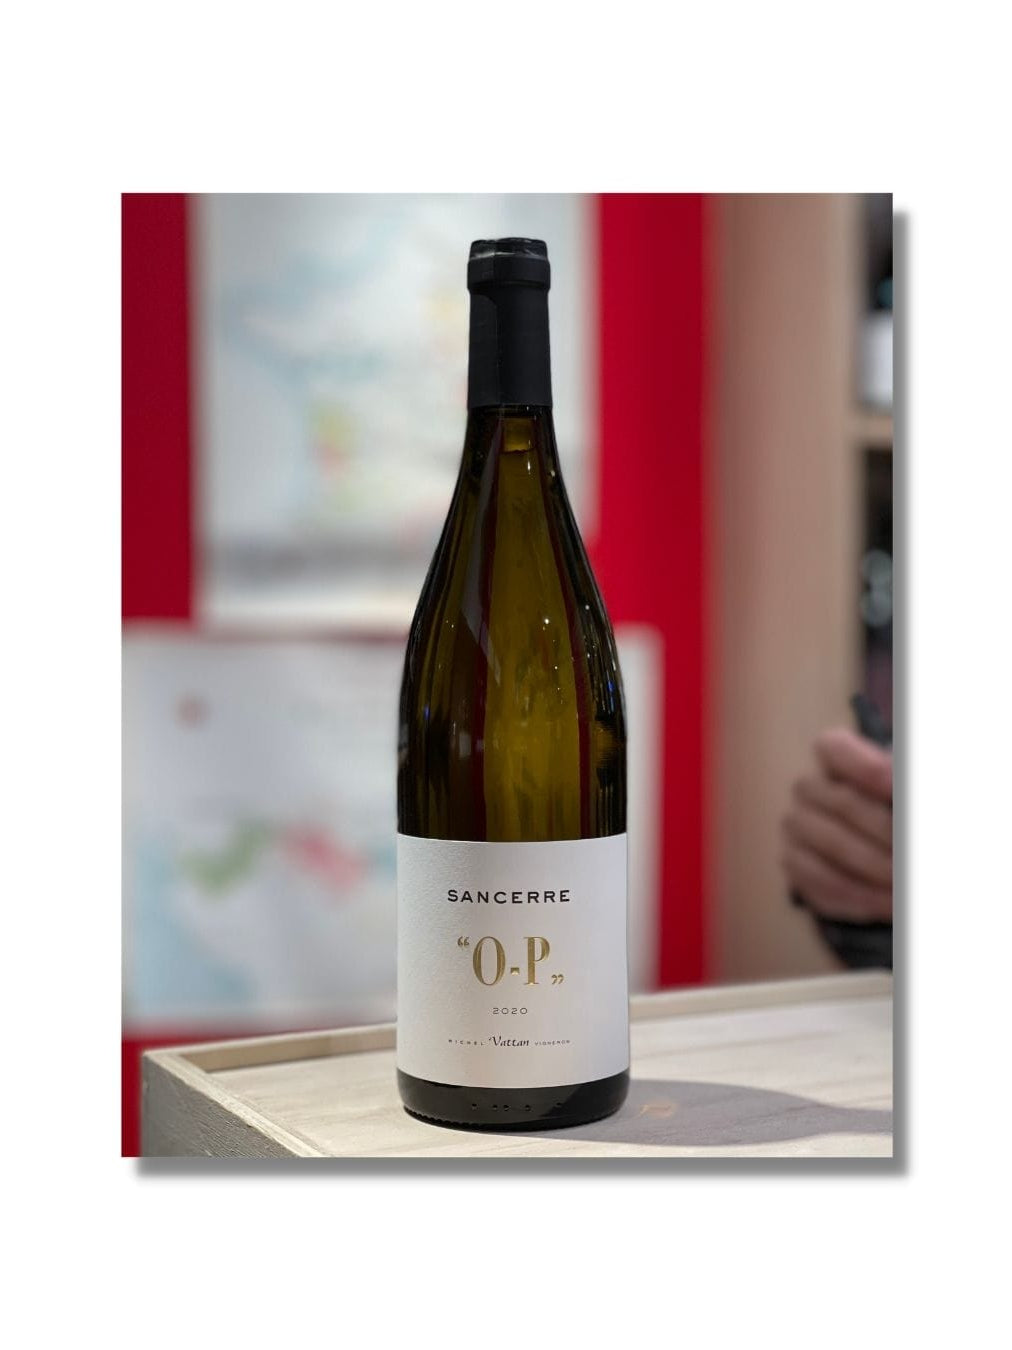 Shop Domaine Michel Vattan Domaine Michel Vattan Sancerre Blanc Cuvée O-P 2020 online at PENTICTON artisanal French wine store in Hong Kong. Discover other French wines, promotions, workshops and featured offers at pentictonpacific.com 